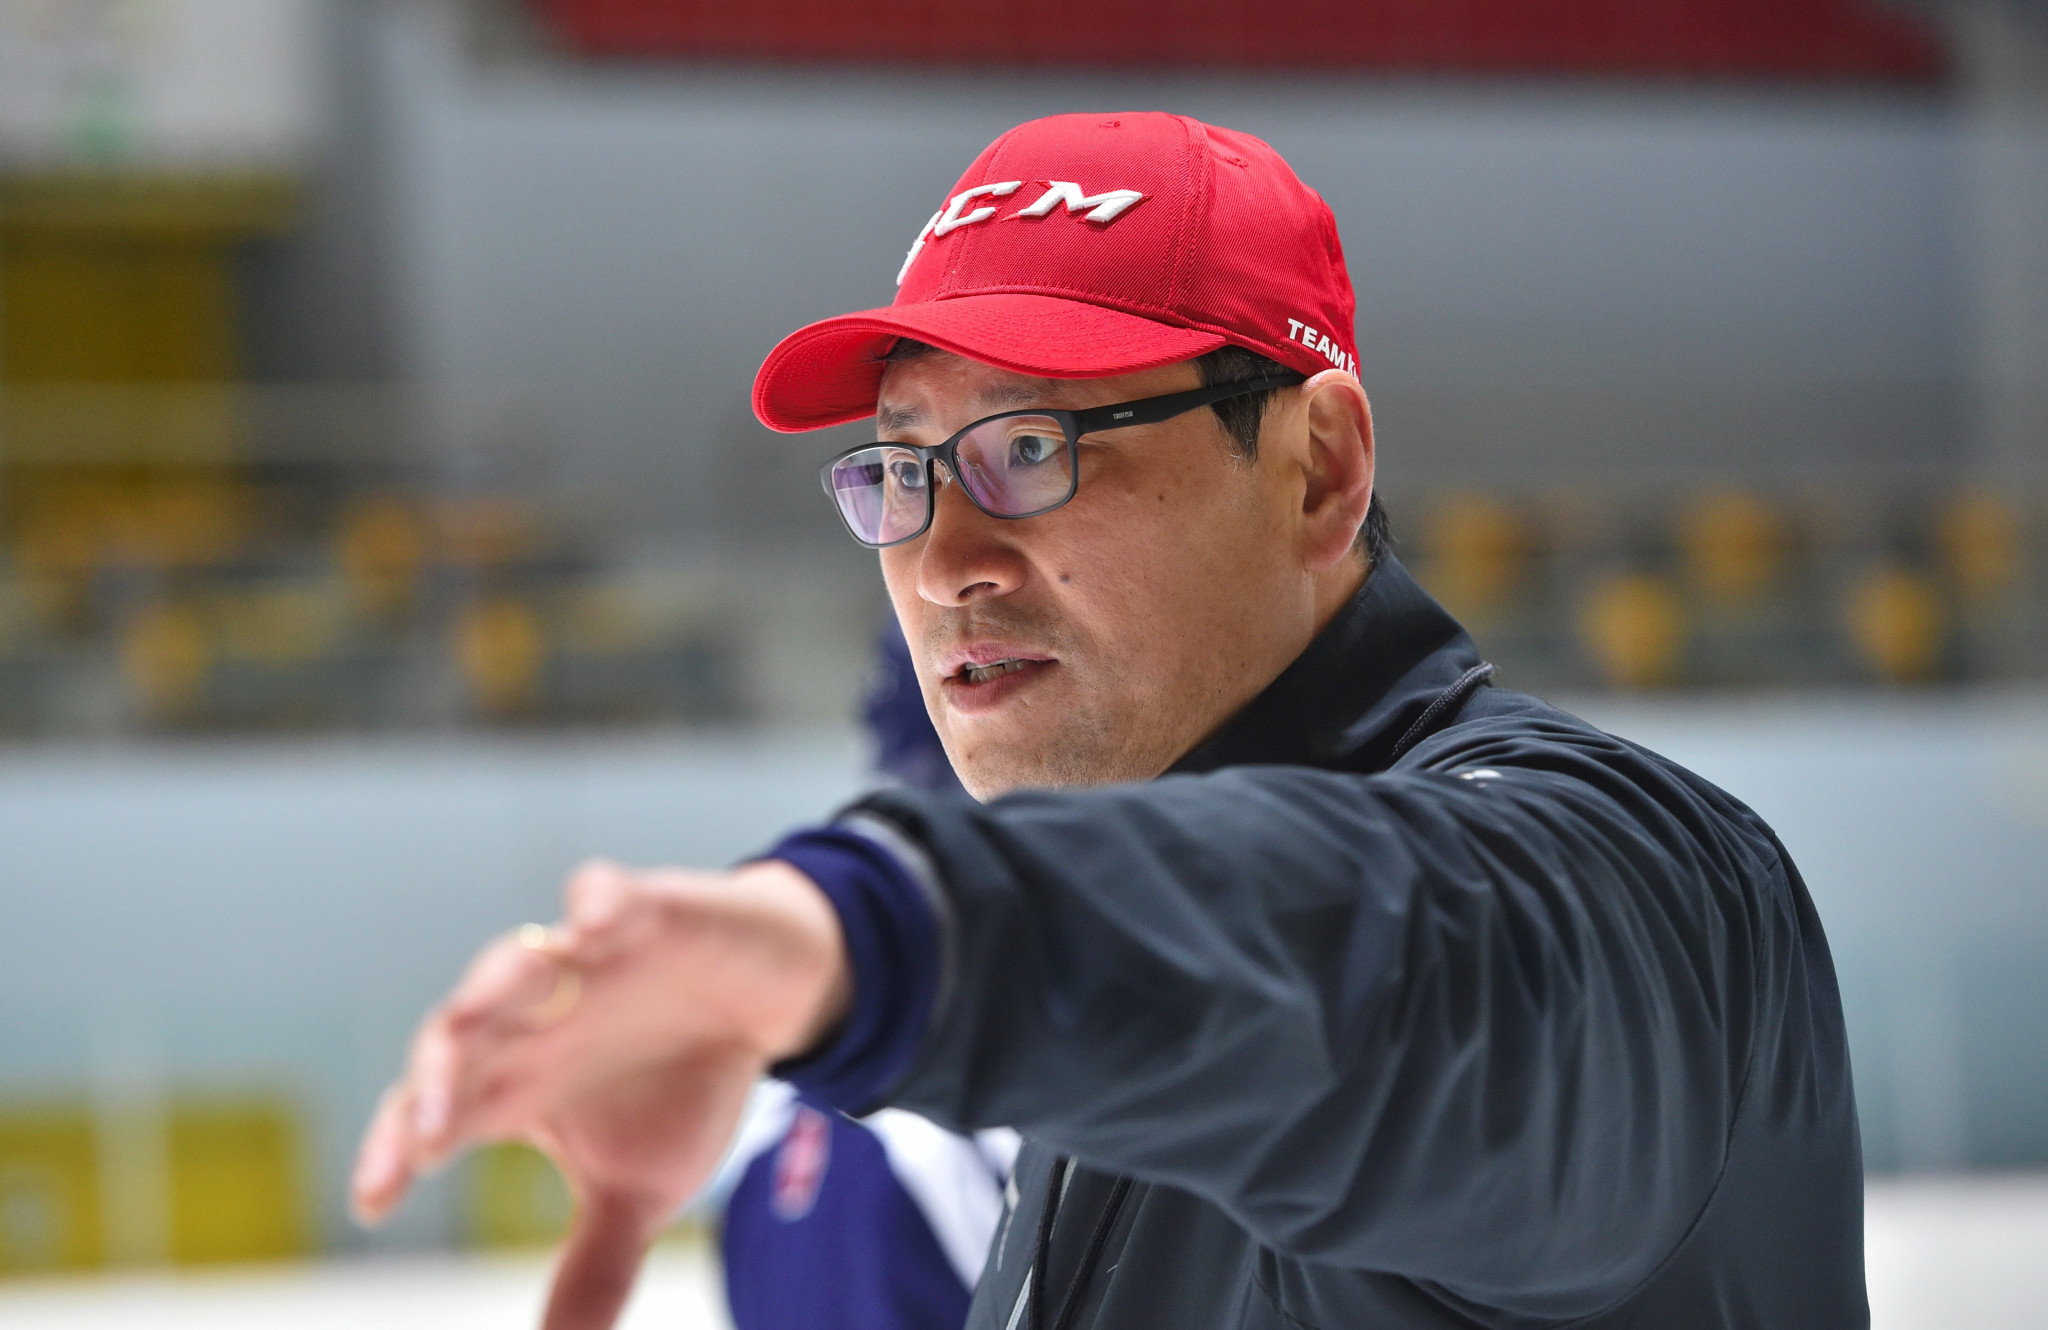 South Korea have extended the contract of coach Jim Paek, a former NHL star, first appointed in 2014 ©Getty Images